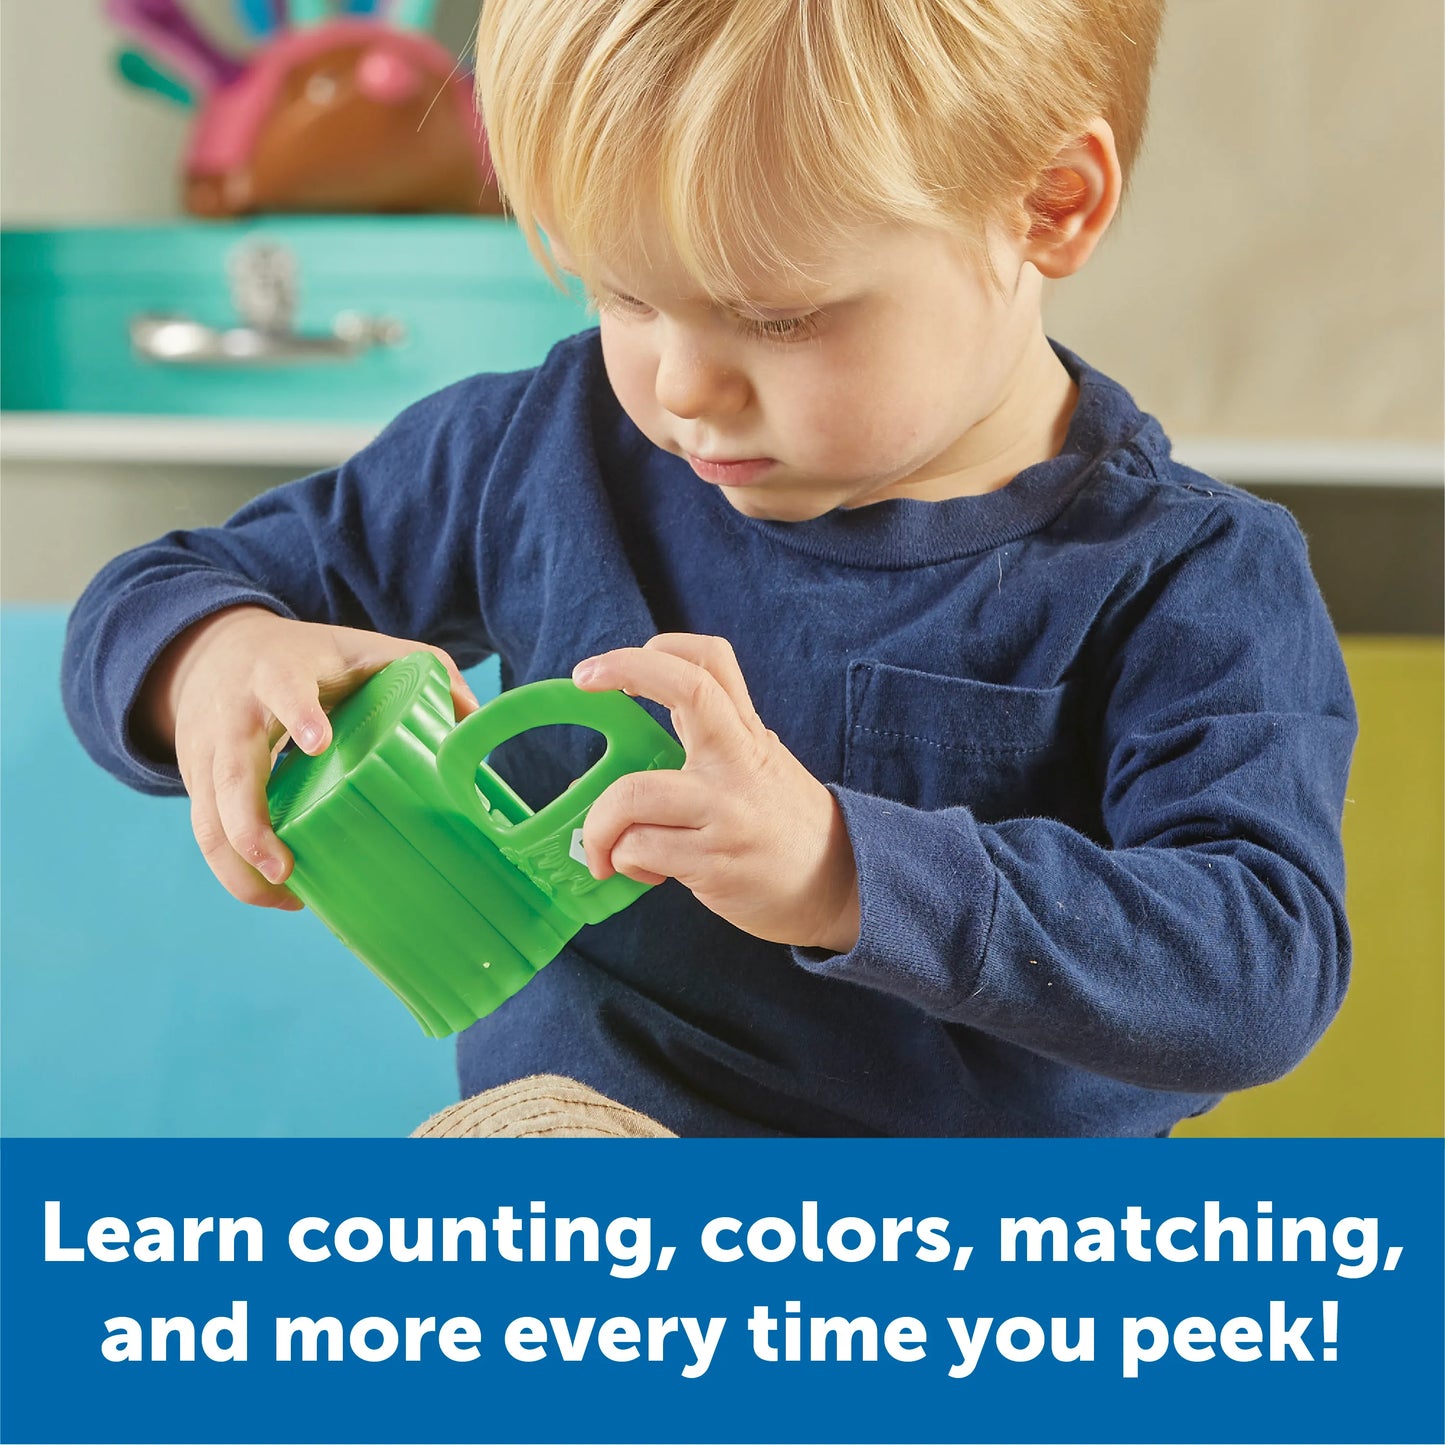 Learning Resources Peekaboo Learning Jungle fine Motor Color Matching Toys